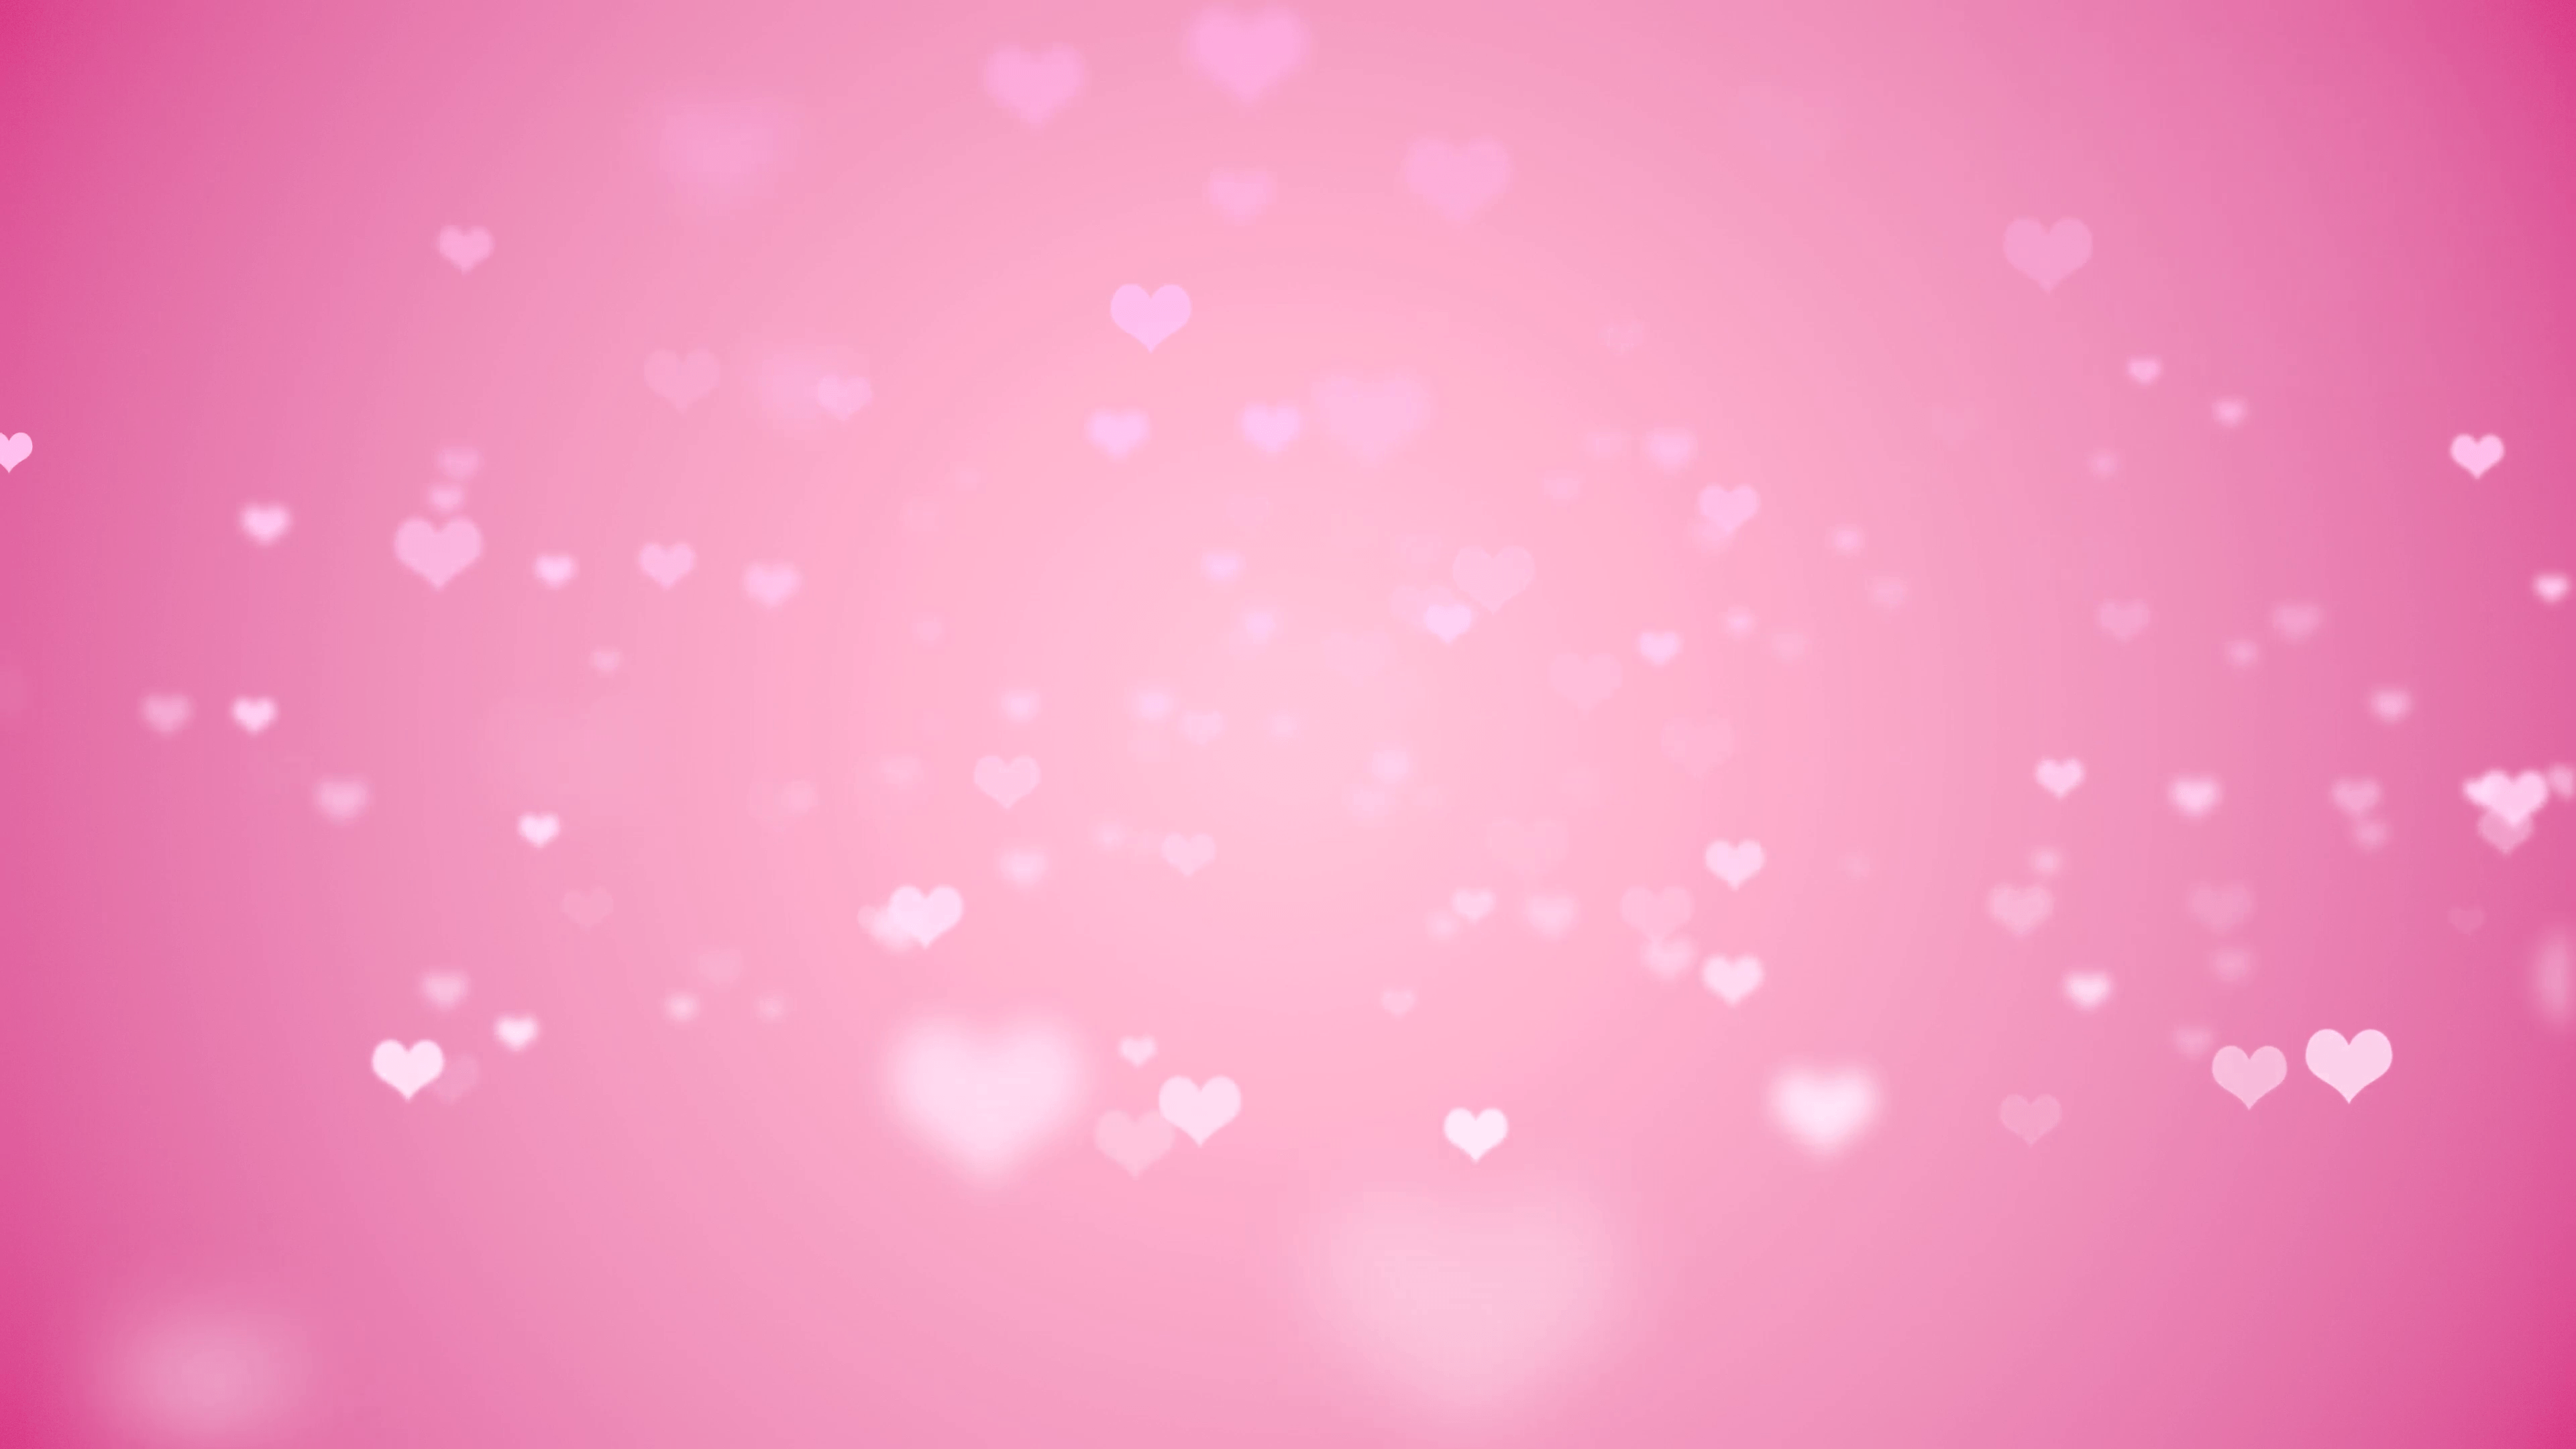 Floating light pink hearts fade in and out against a pink backdrop